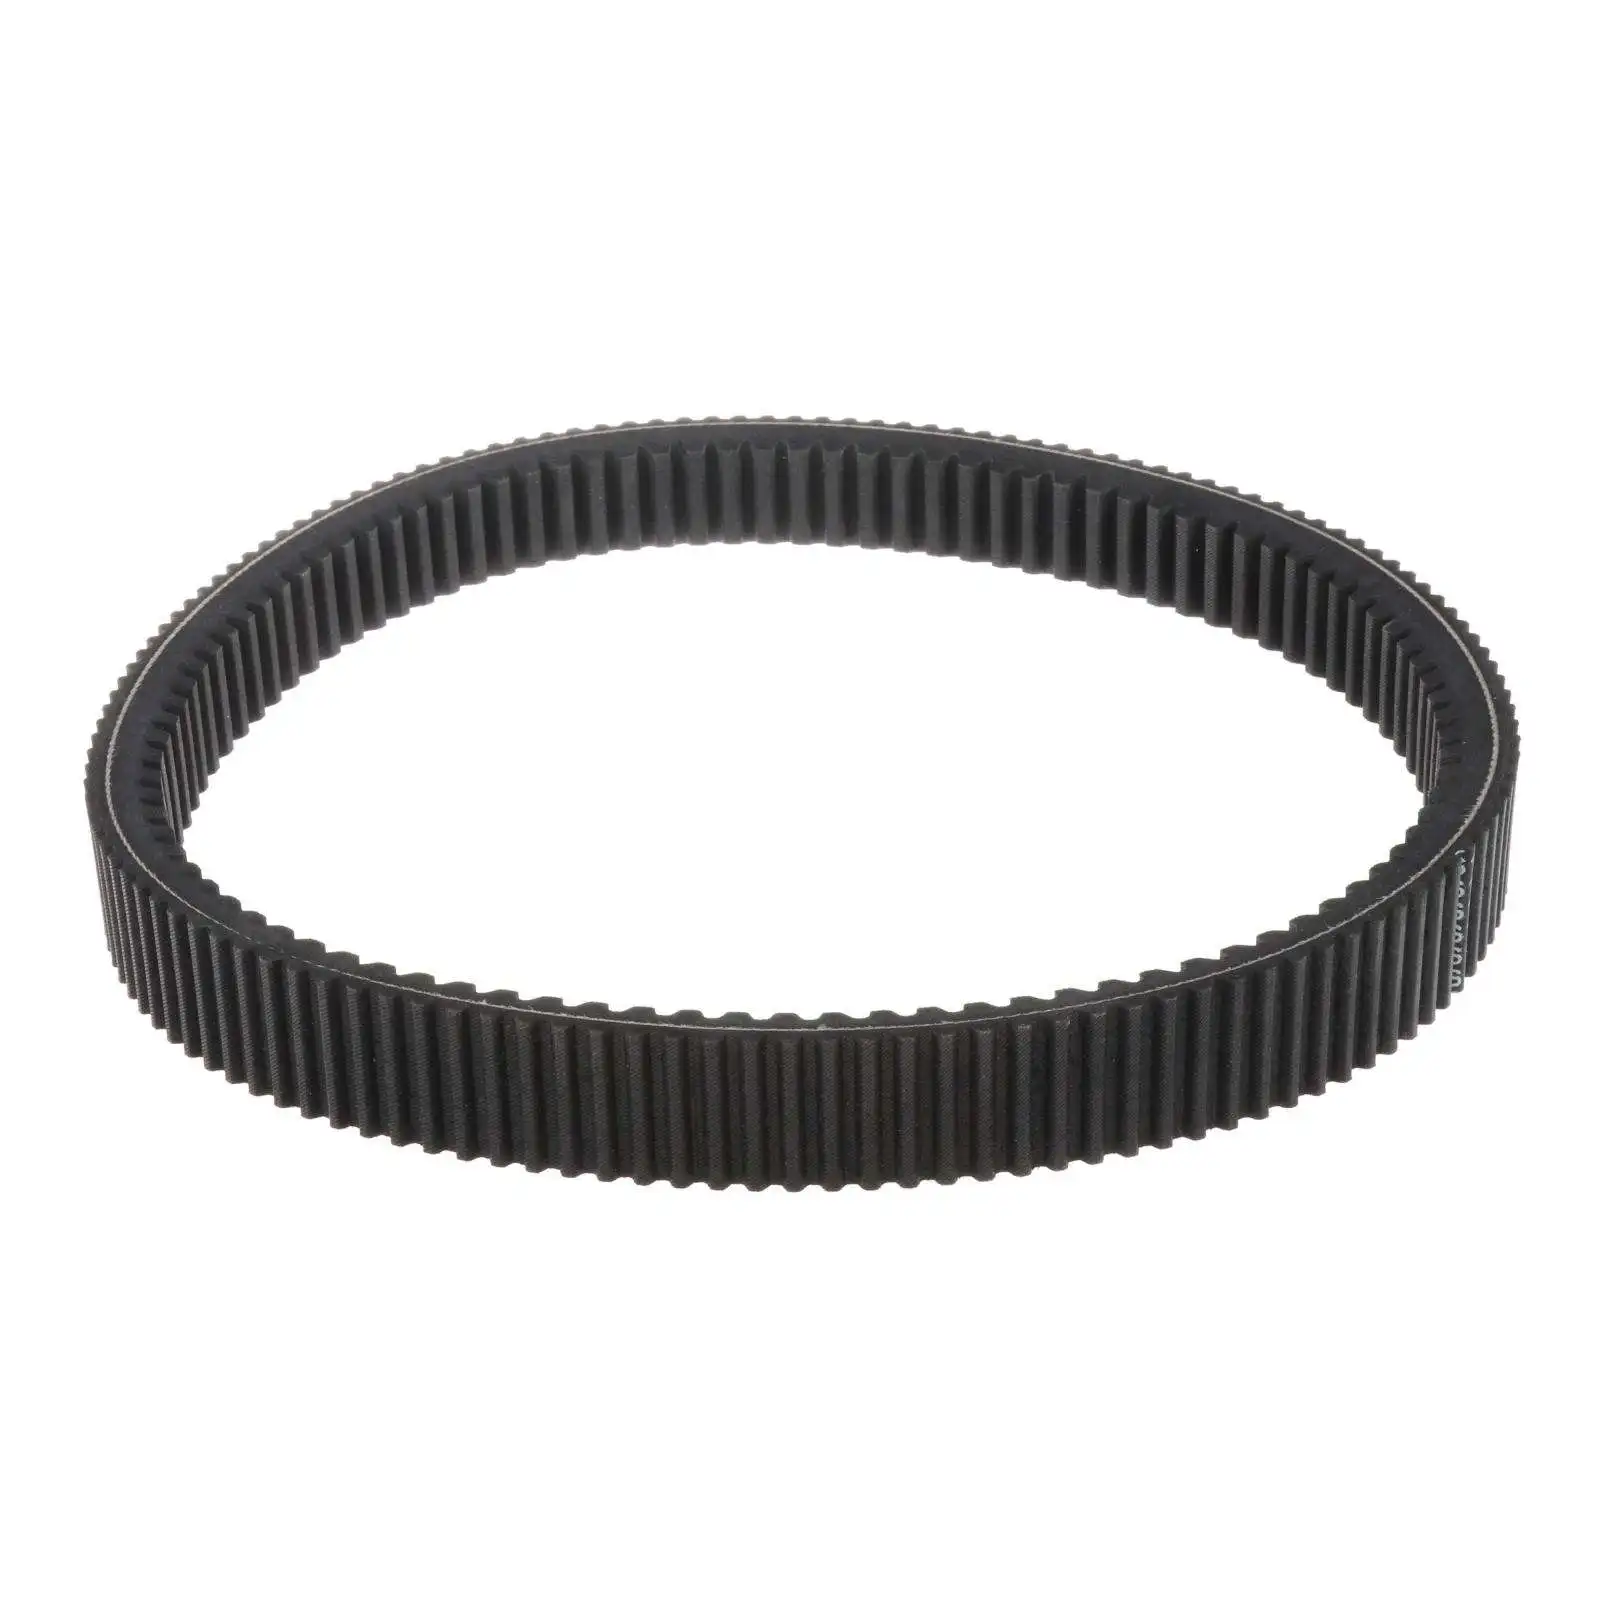 New Snowmobile Performance Drive Belt Double-Sided Replacement 417300571 for Ski-Doo 850 E-TEC